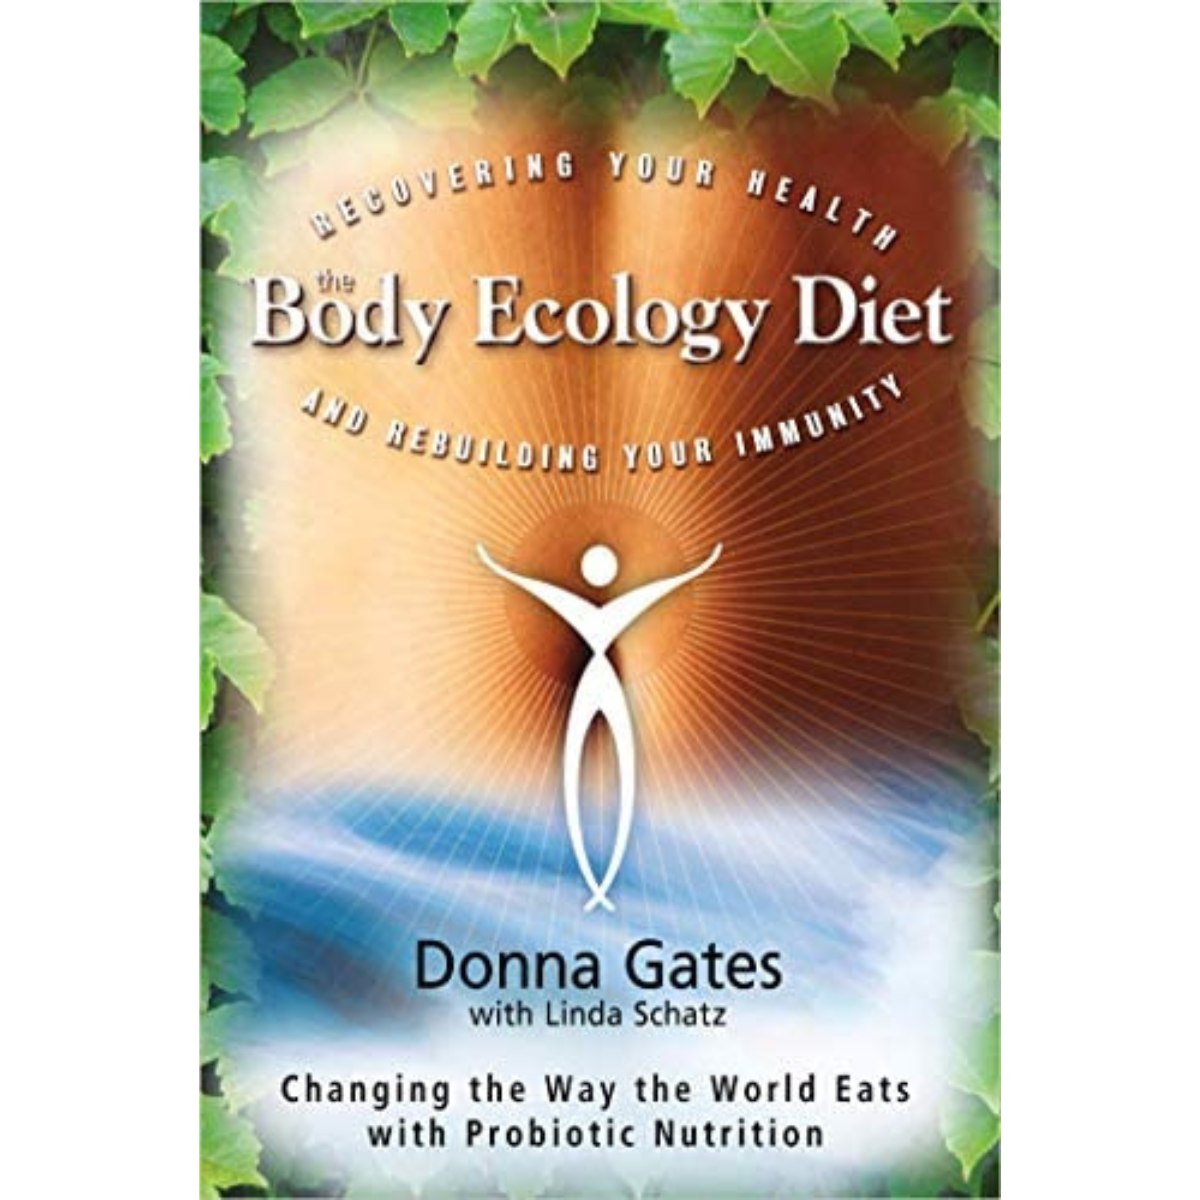 Body Ecology Diet, The